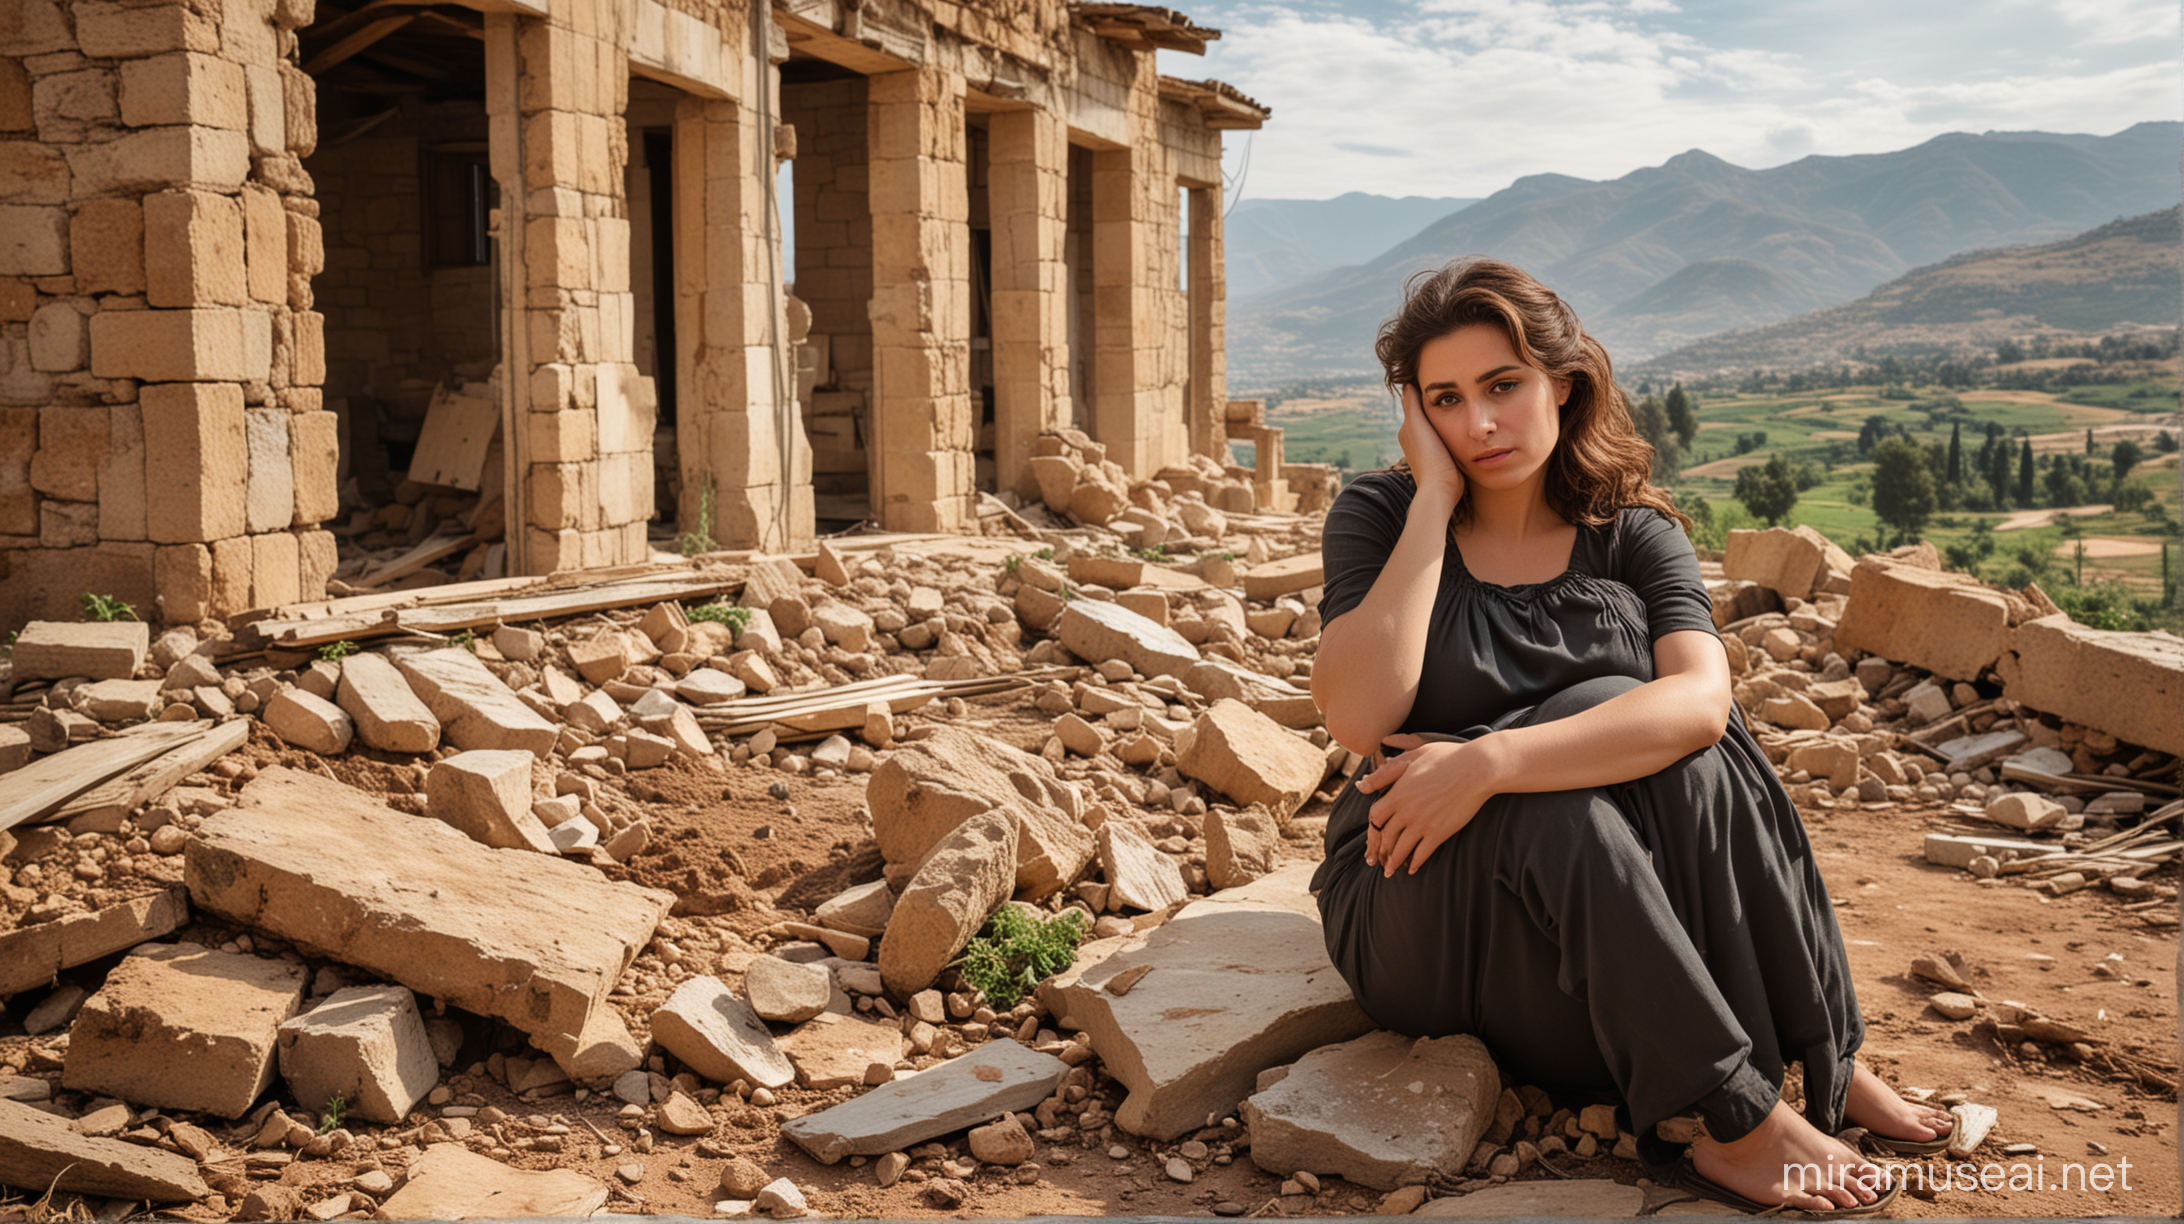 Pregnant Farmer Woman in Dramatic Pose Amidst Southern Lebanese Ruins